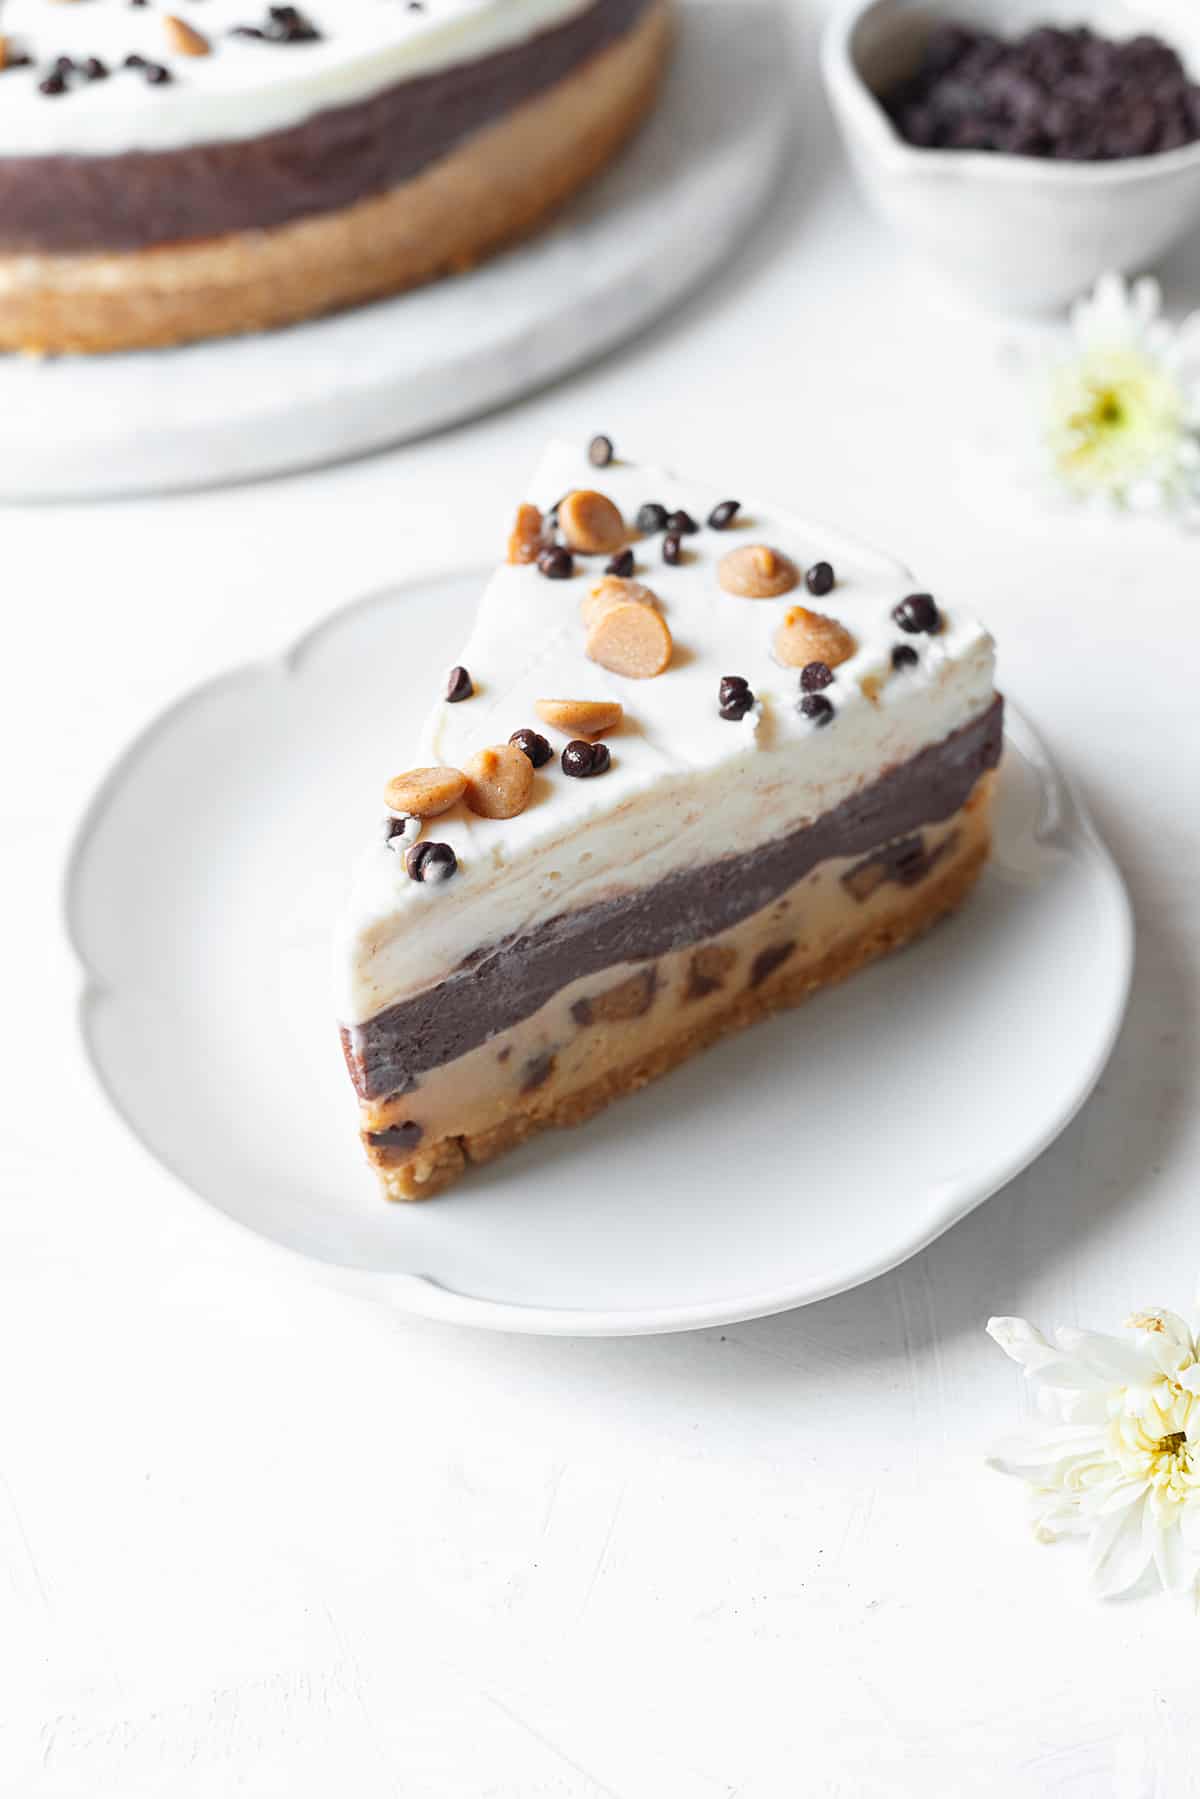 slice of chocolate peanut butter pie on a plate with chocolate chips and peanut butter chips.